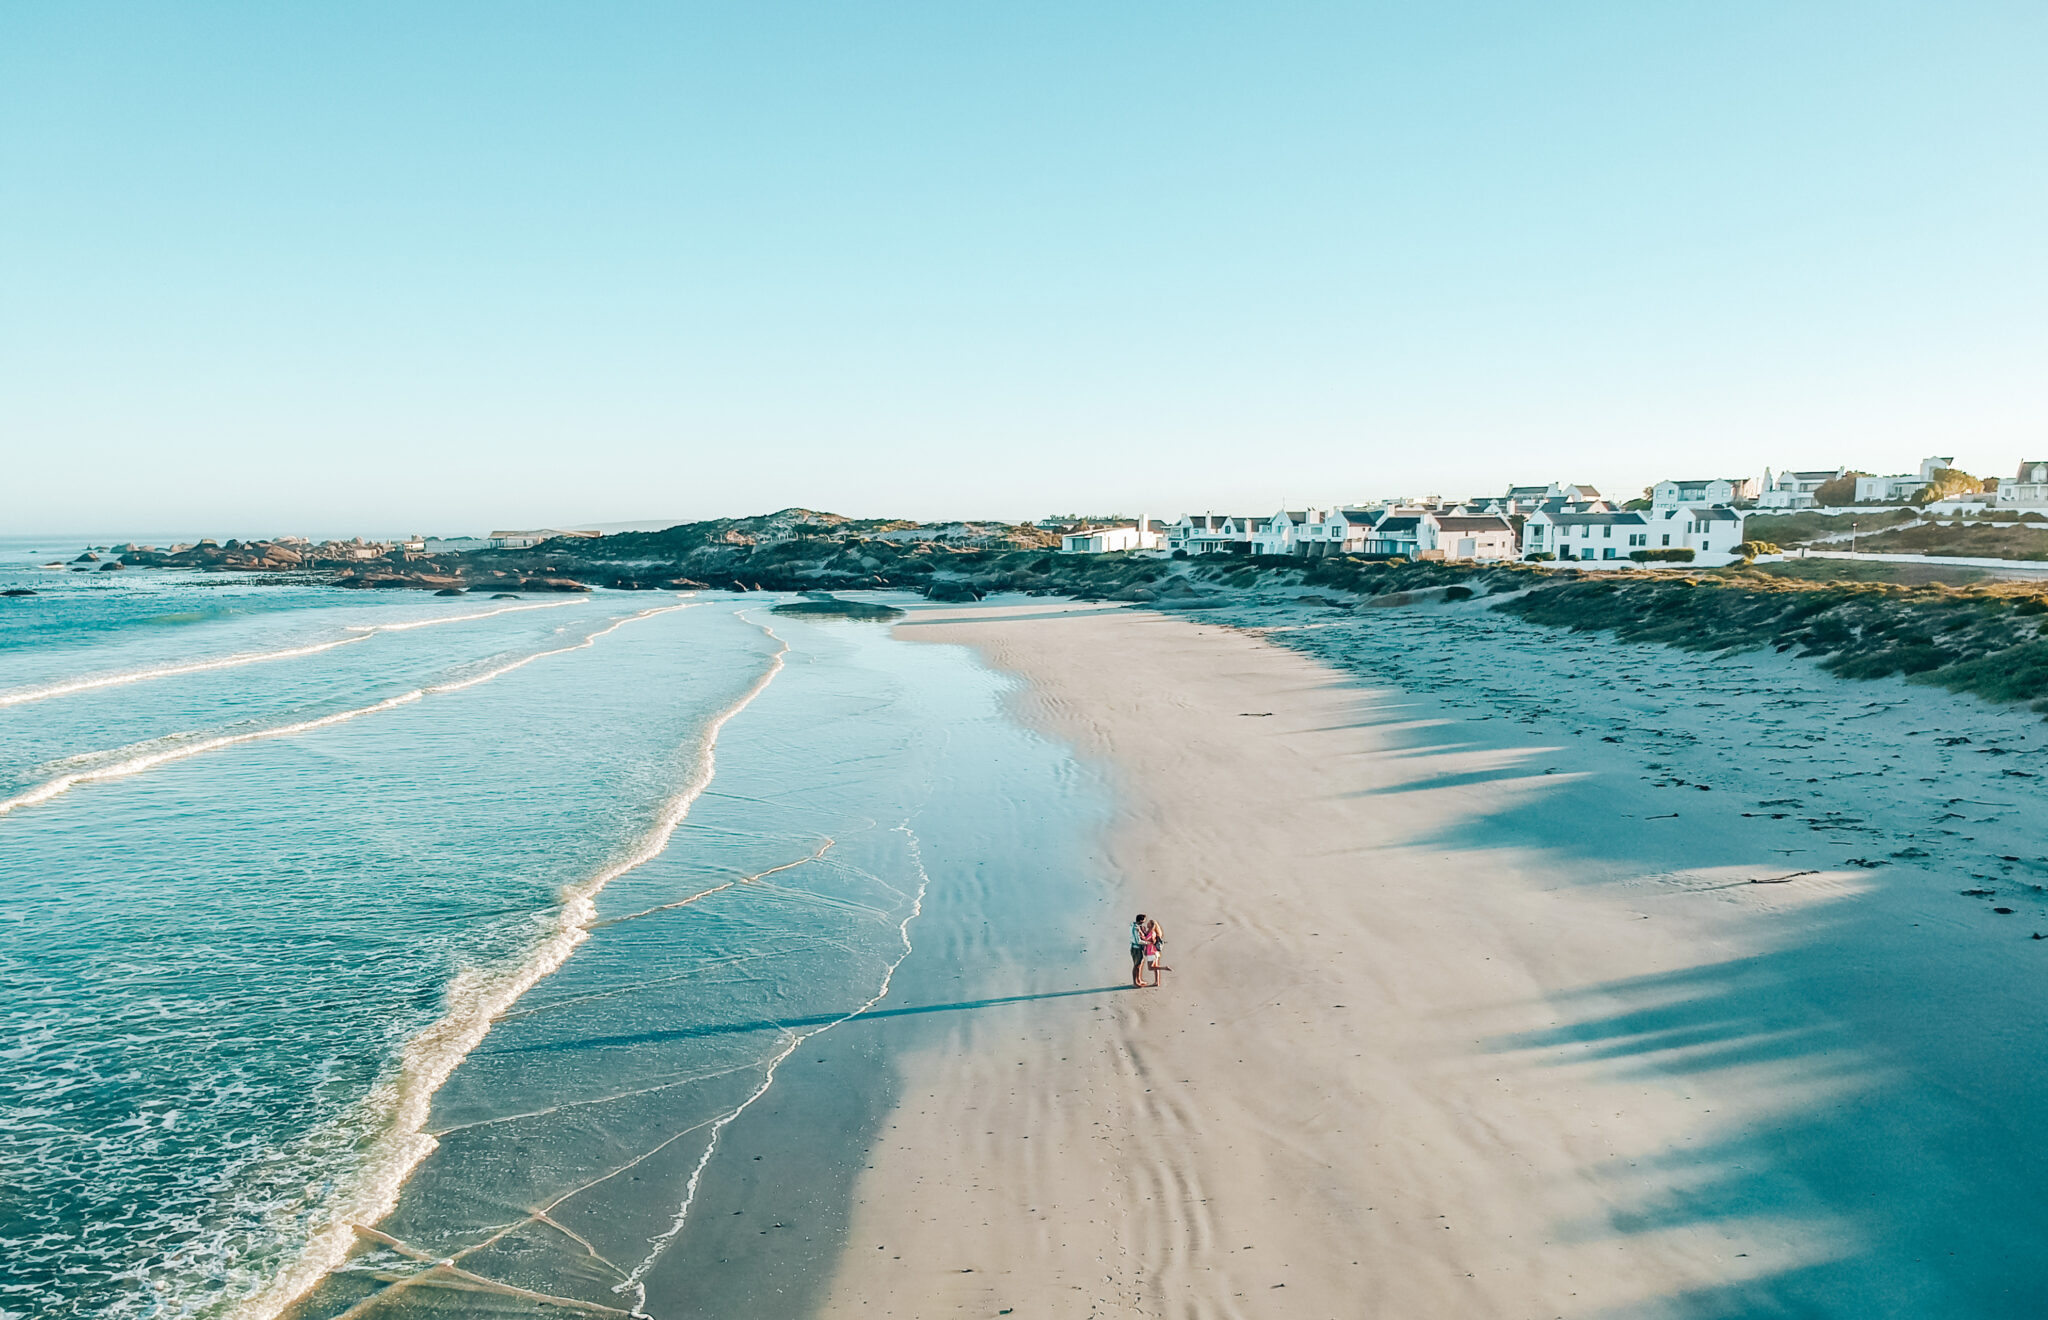 Gonana Guesthouse seen from the sky | Paternoster guesthouse